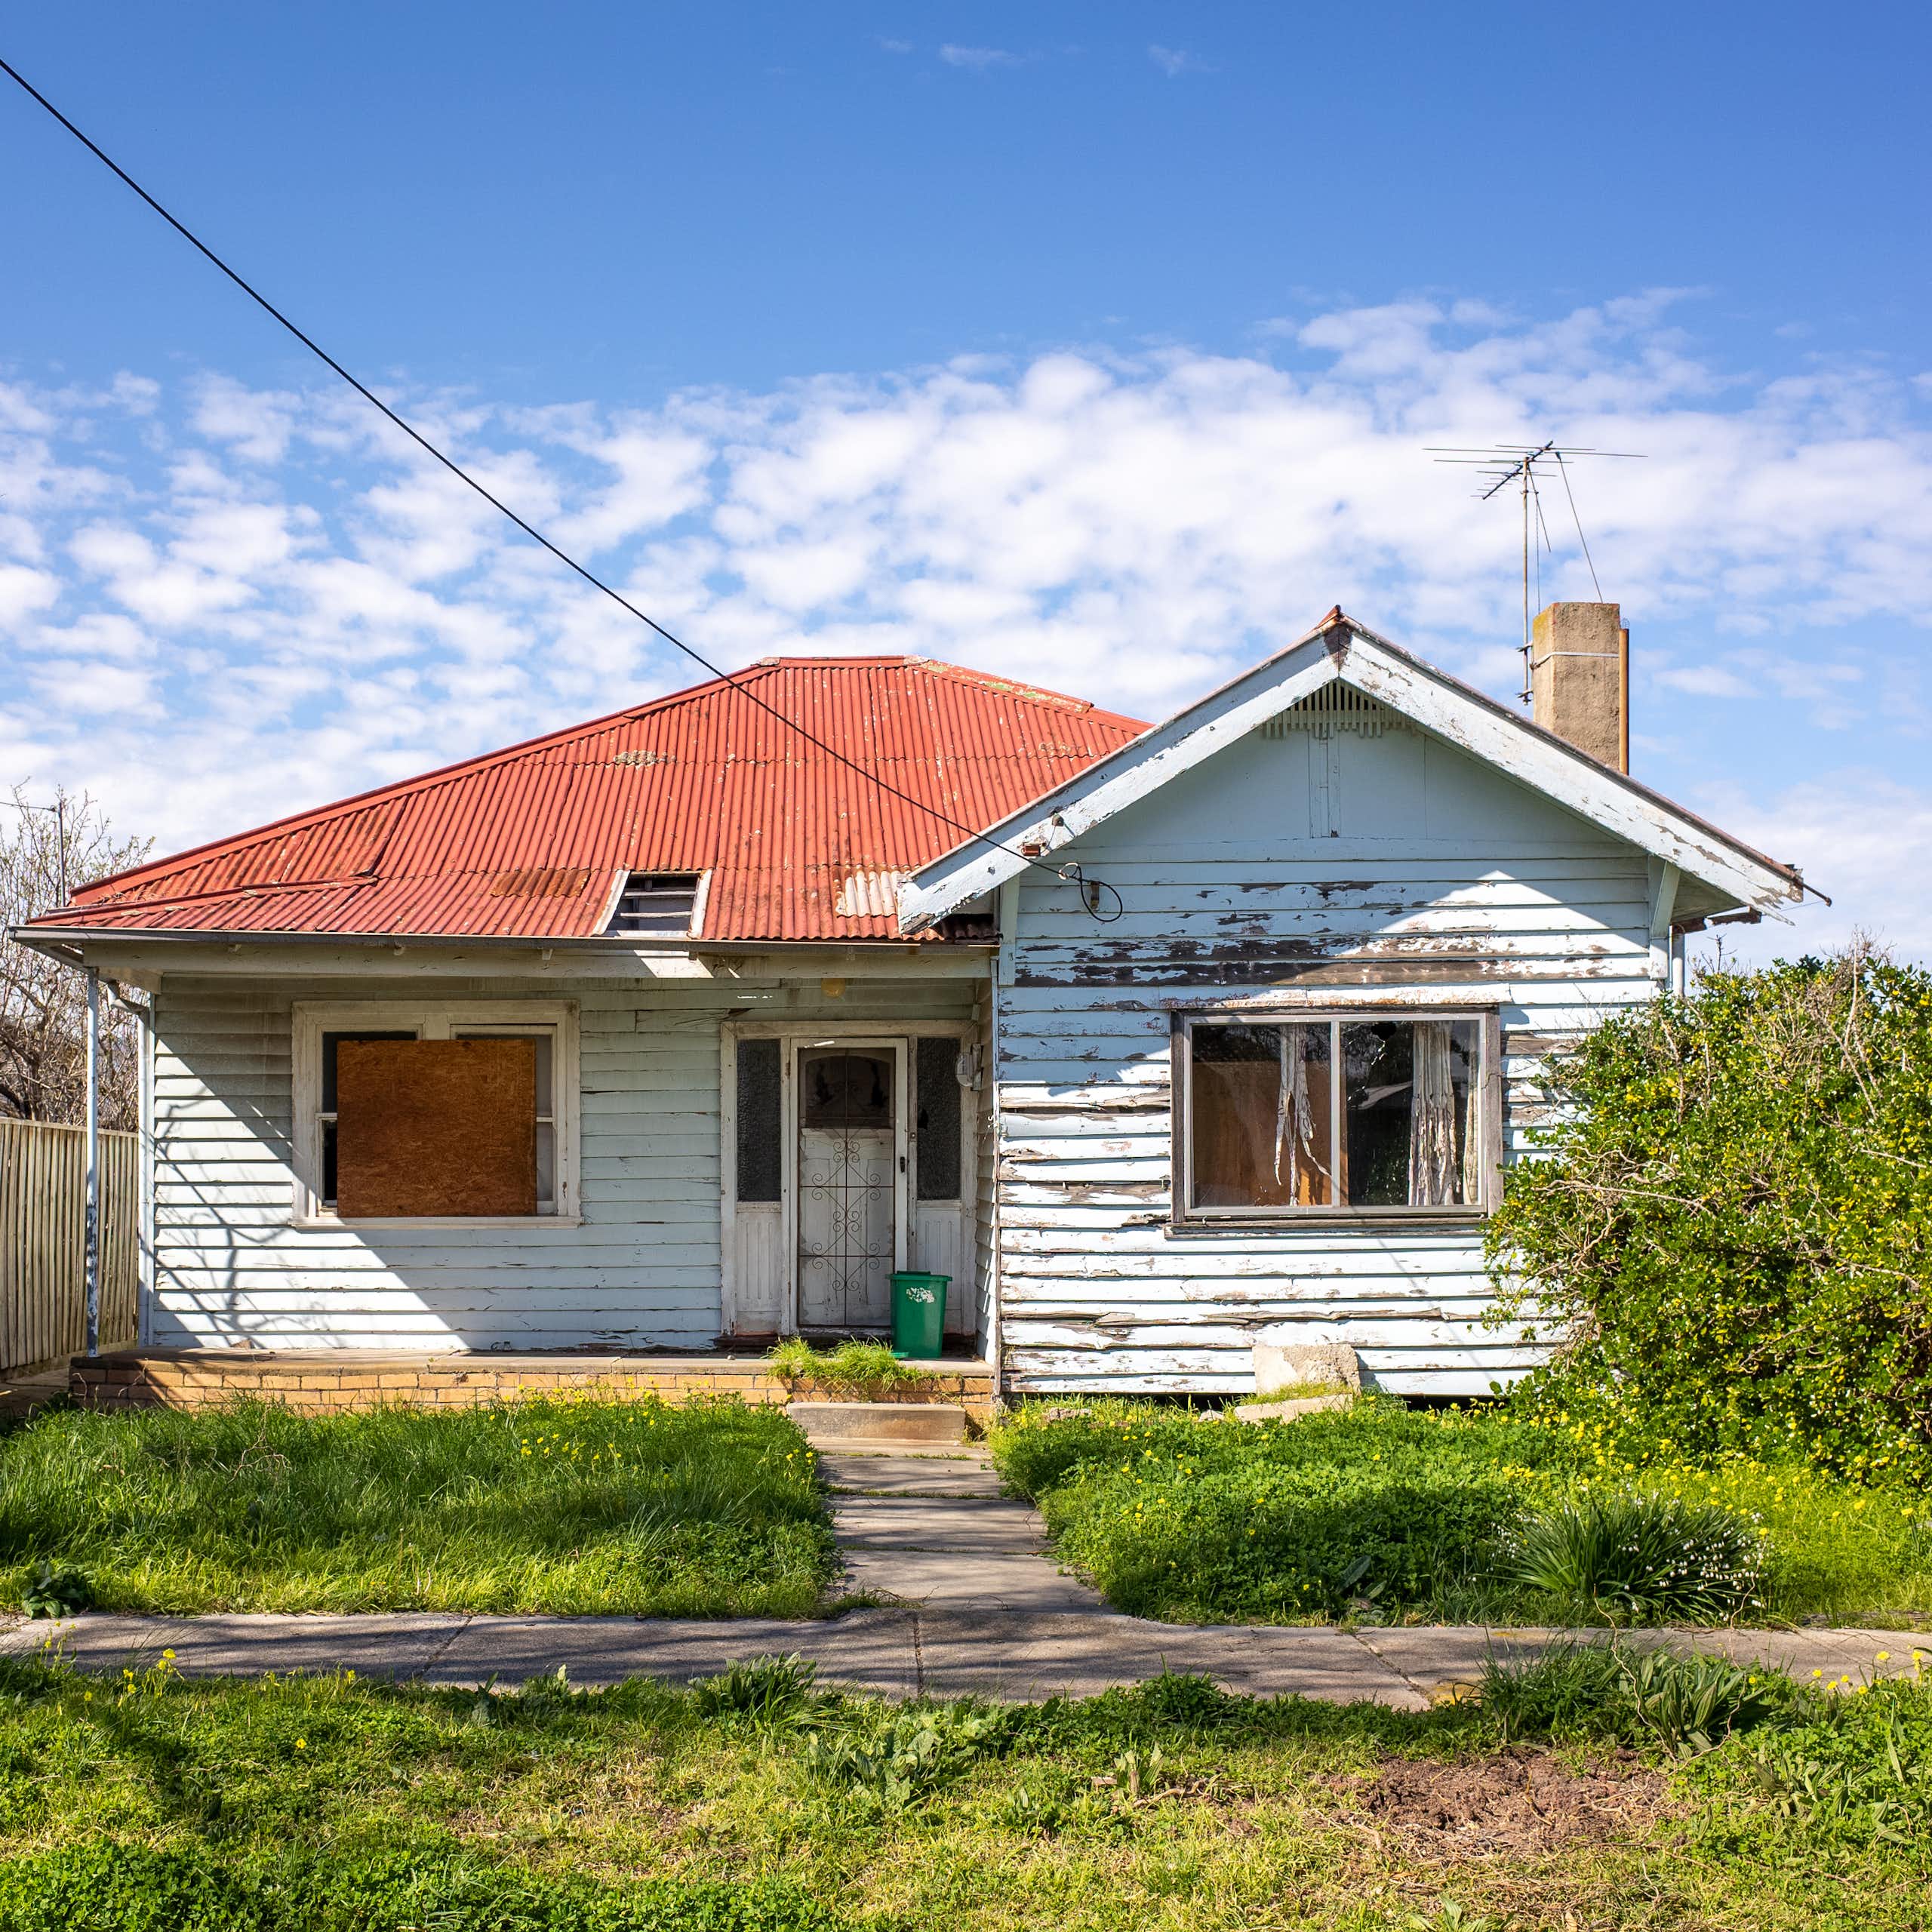 If you squat in a vacant property, does the law give you the house for free? Well, sort of